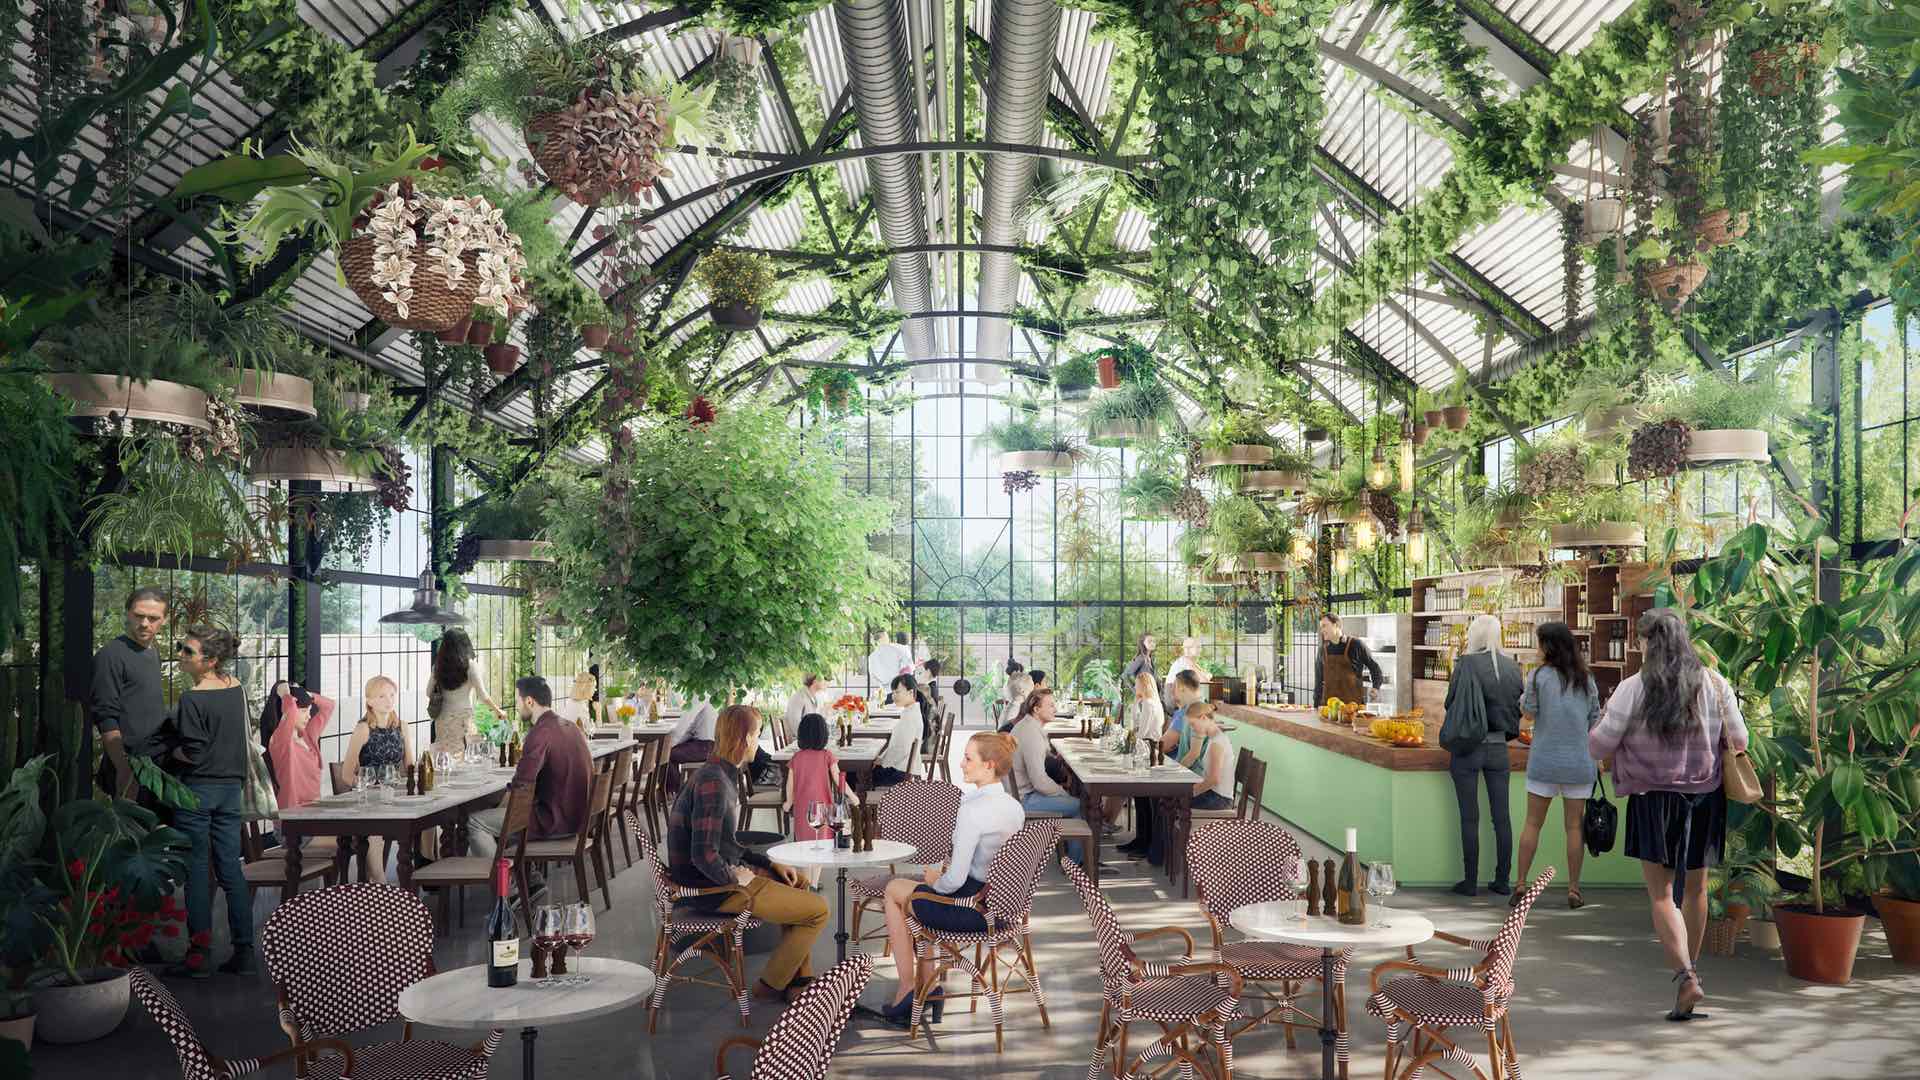 This Is What Melbourne's Huge Soon-to-Open Urban Rooftop Farm Will Look Like